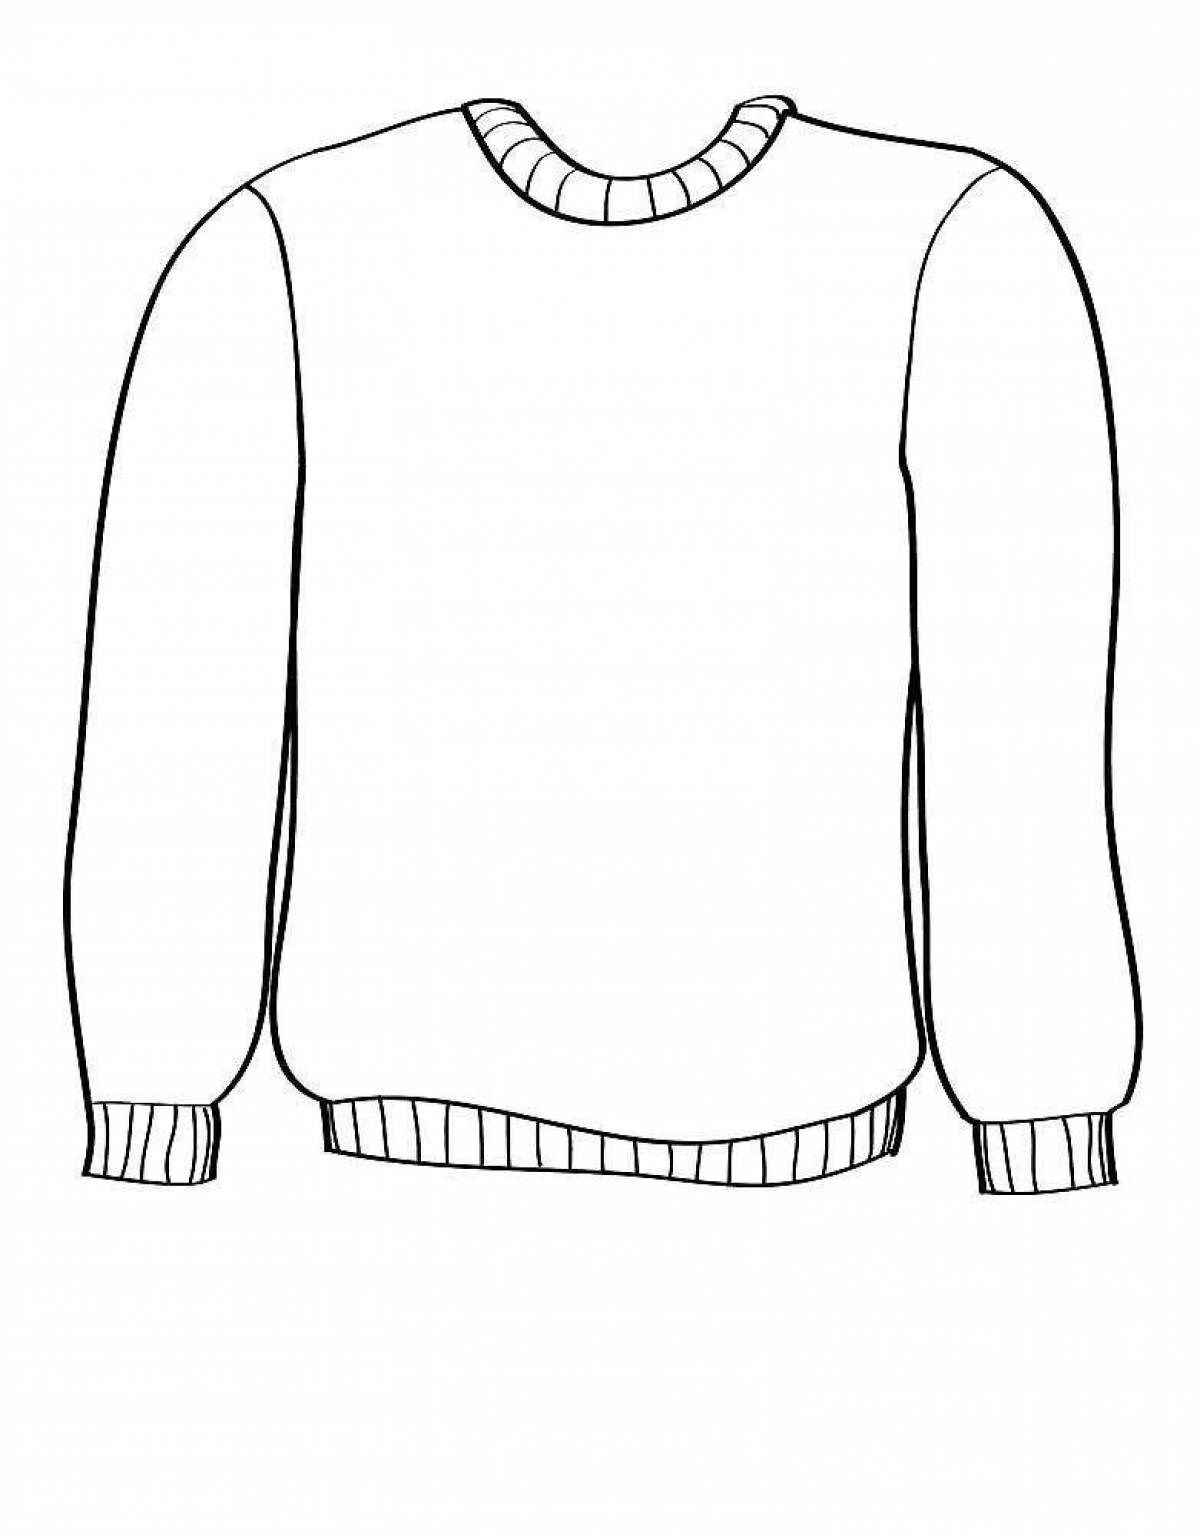 Sassy sweater coloring page